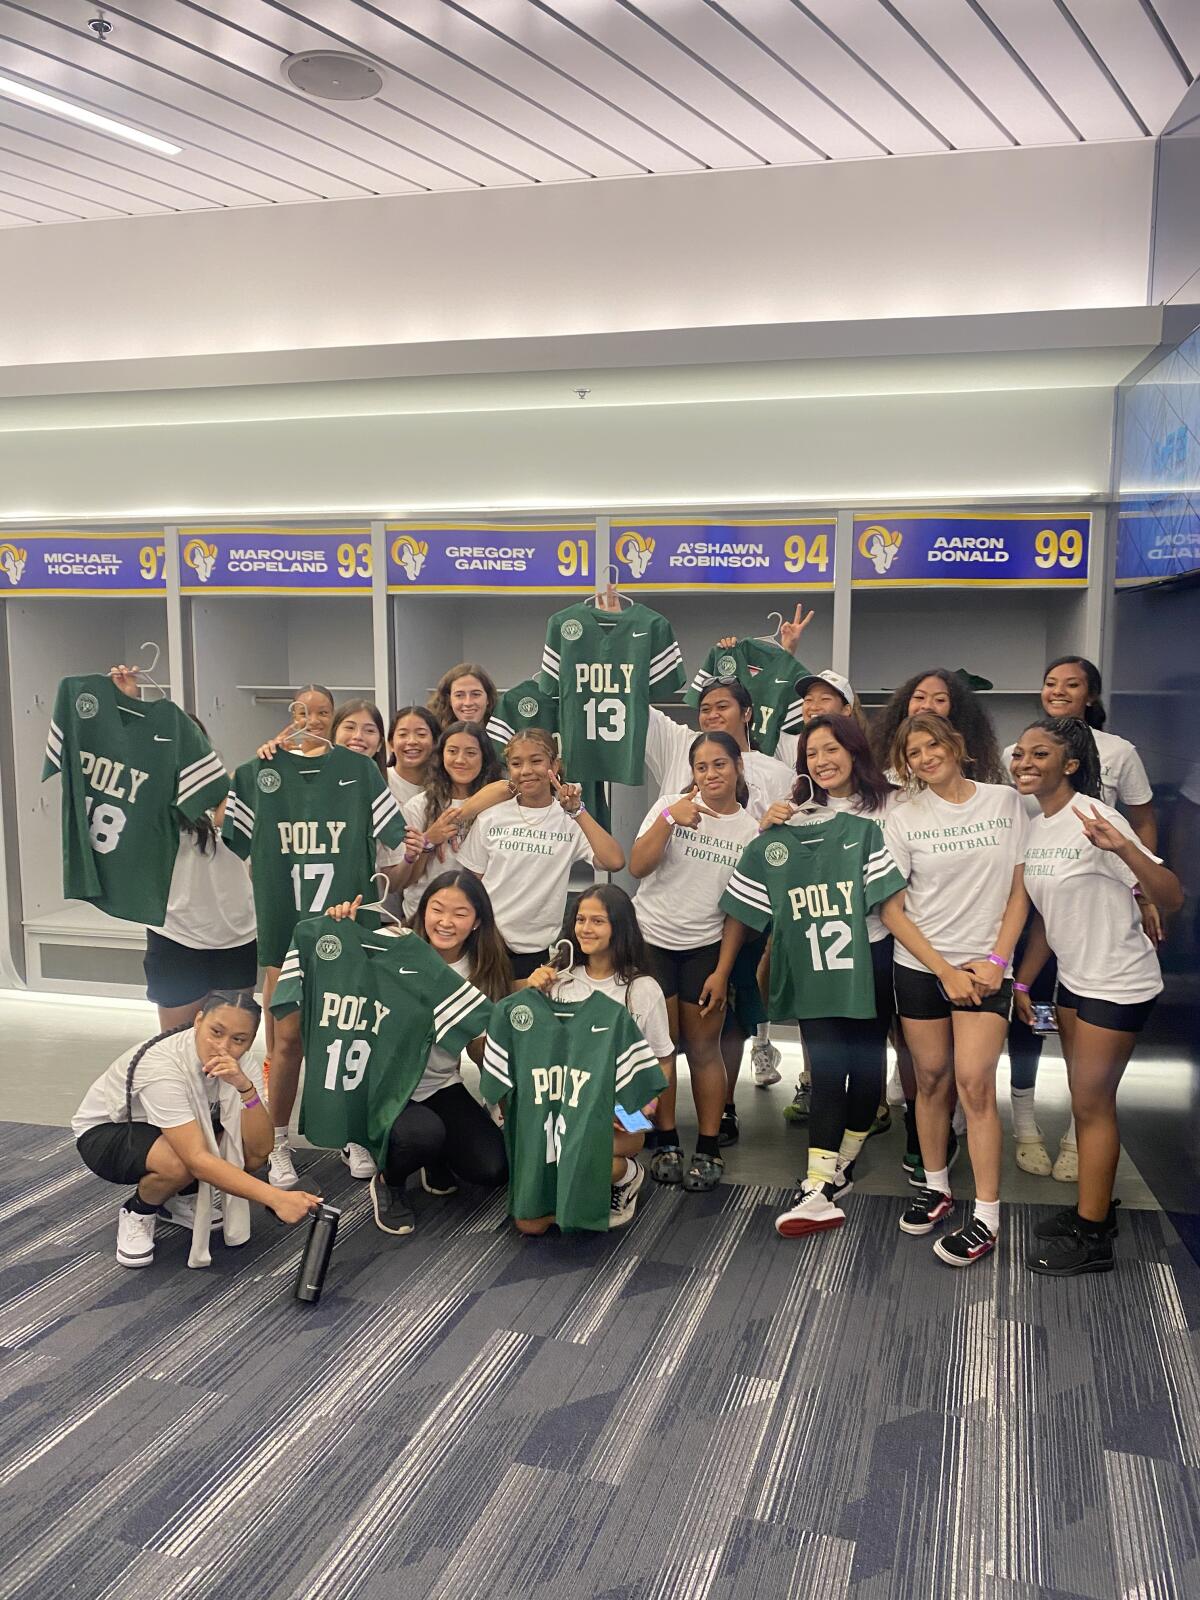 Members of the Long Beach Poly team in the League of Champions girls' flag football league receive their jerseys.